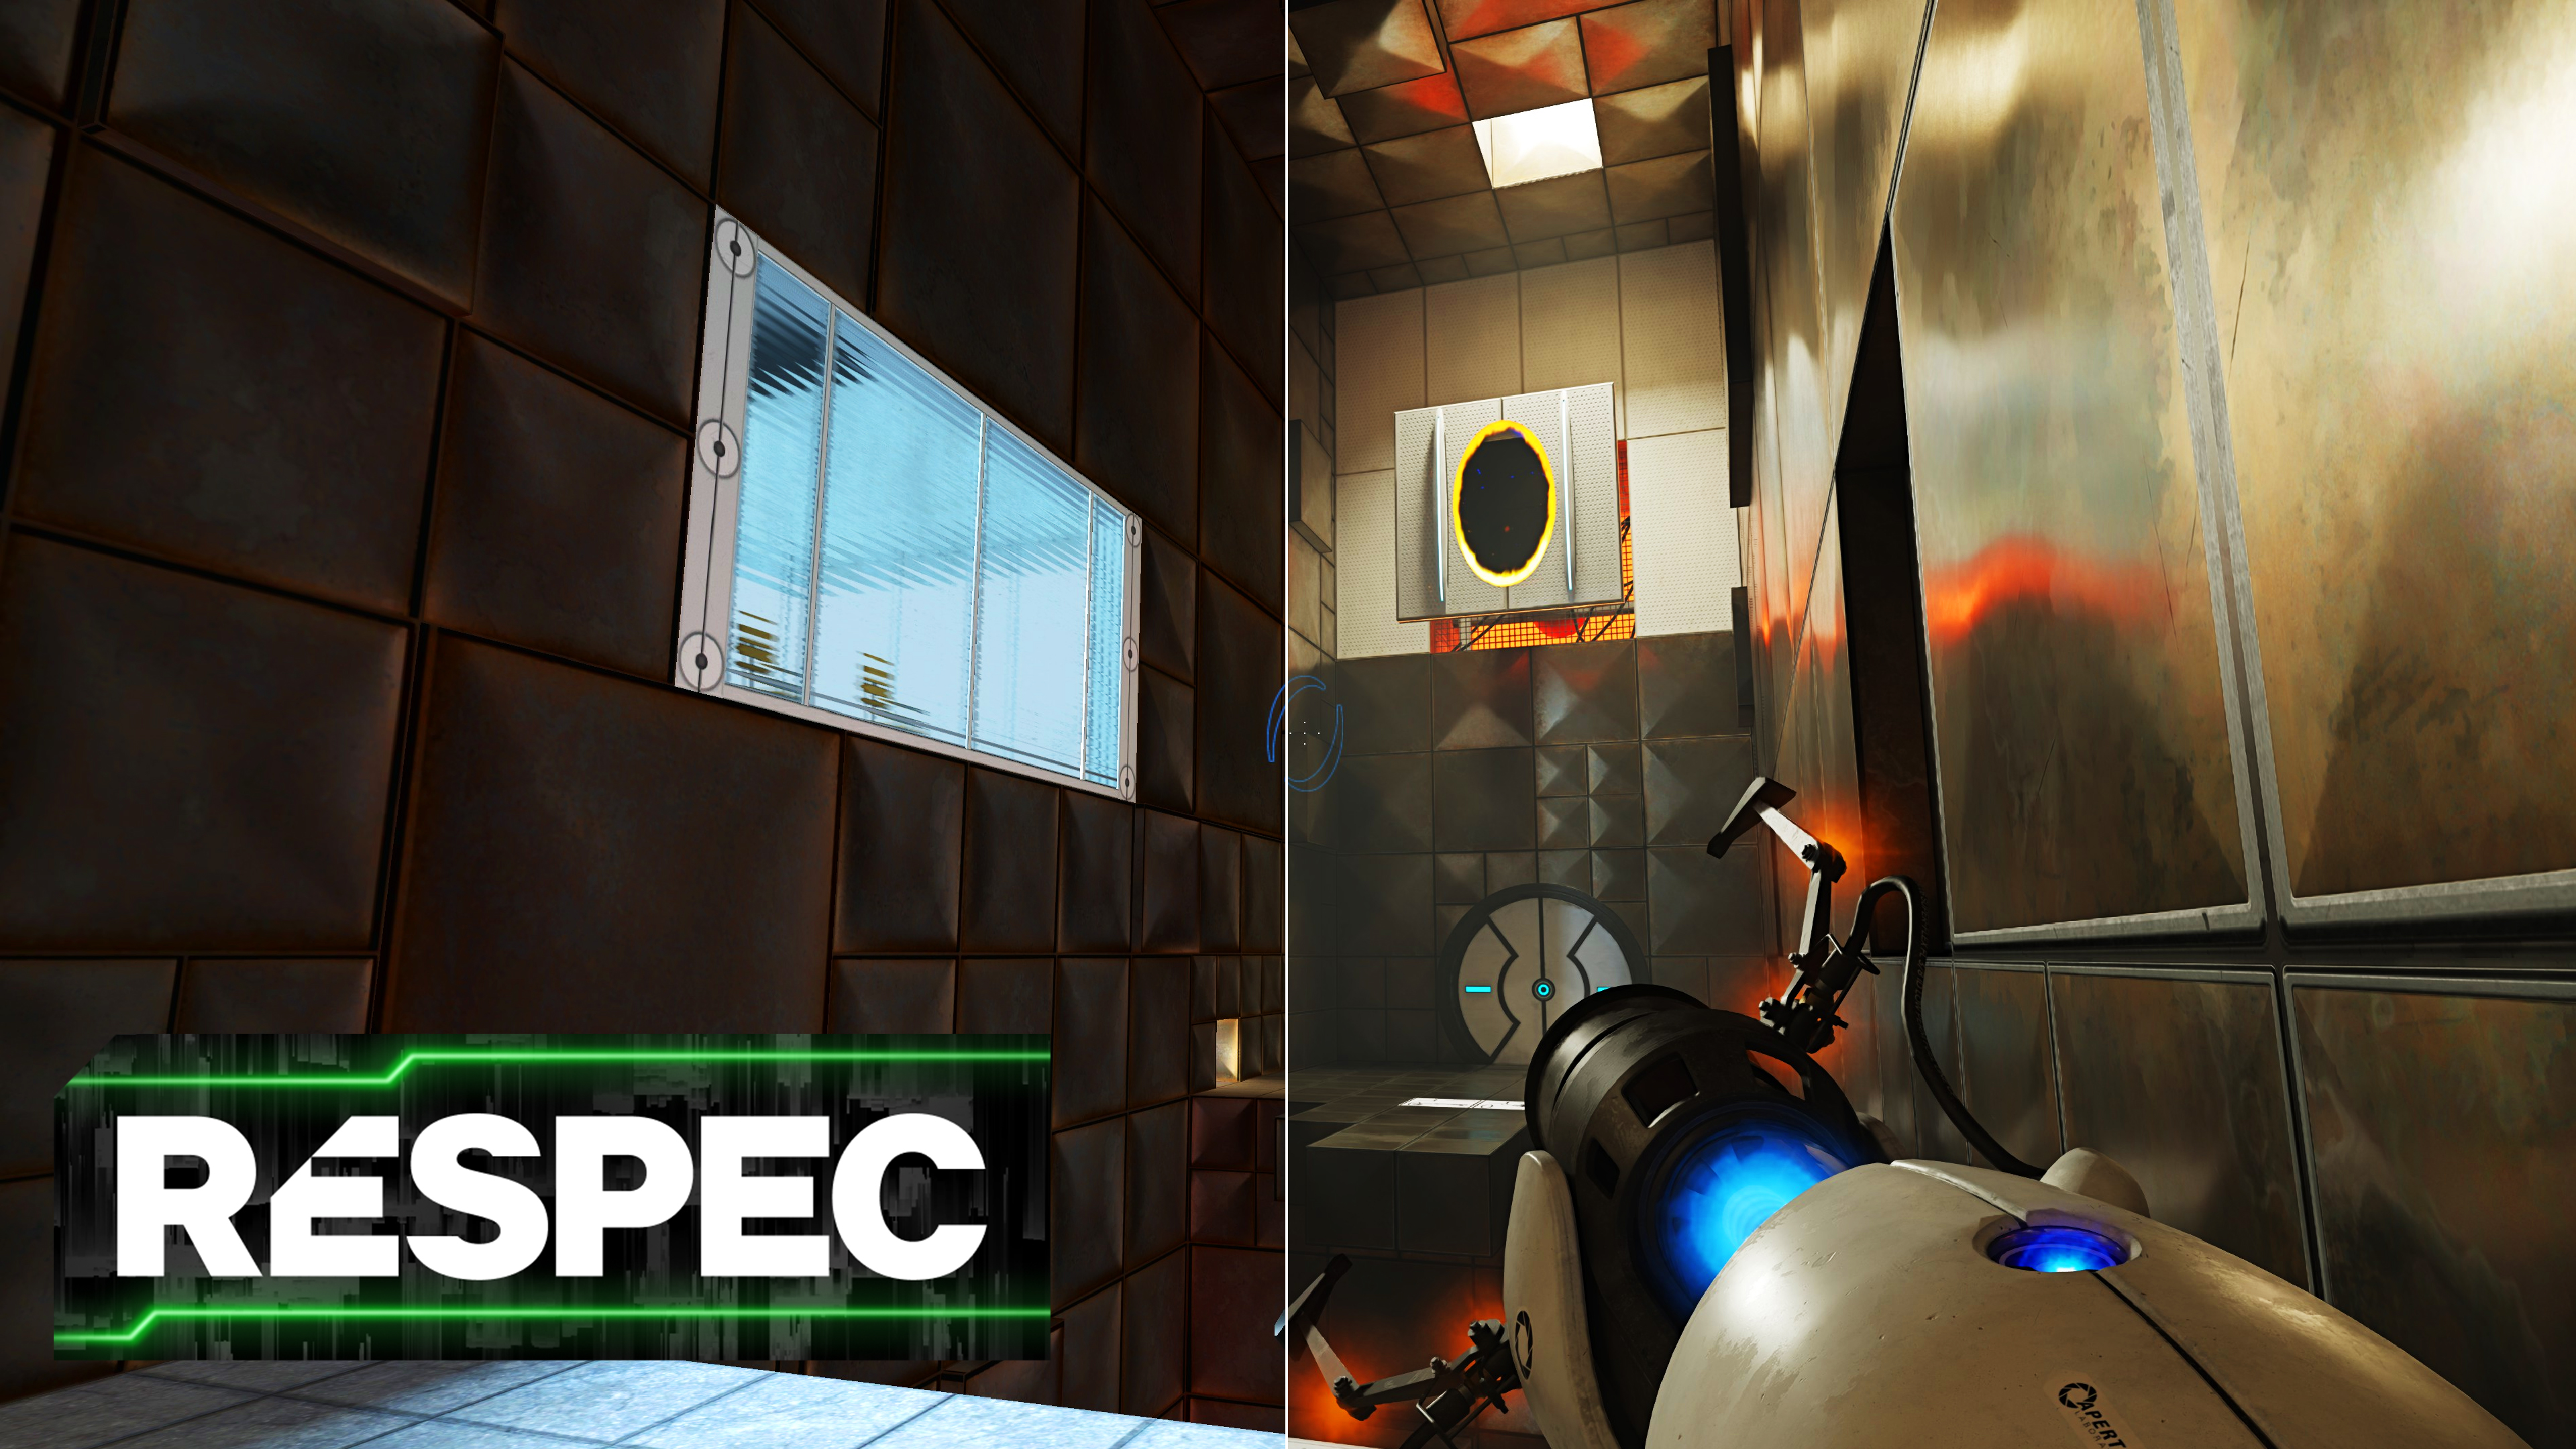 Here’s why Portal RTX is the most demanding PC game I’ve
ever tested